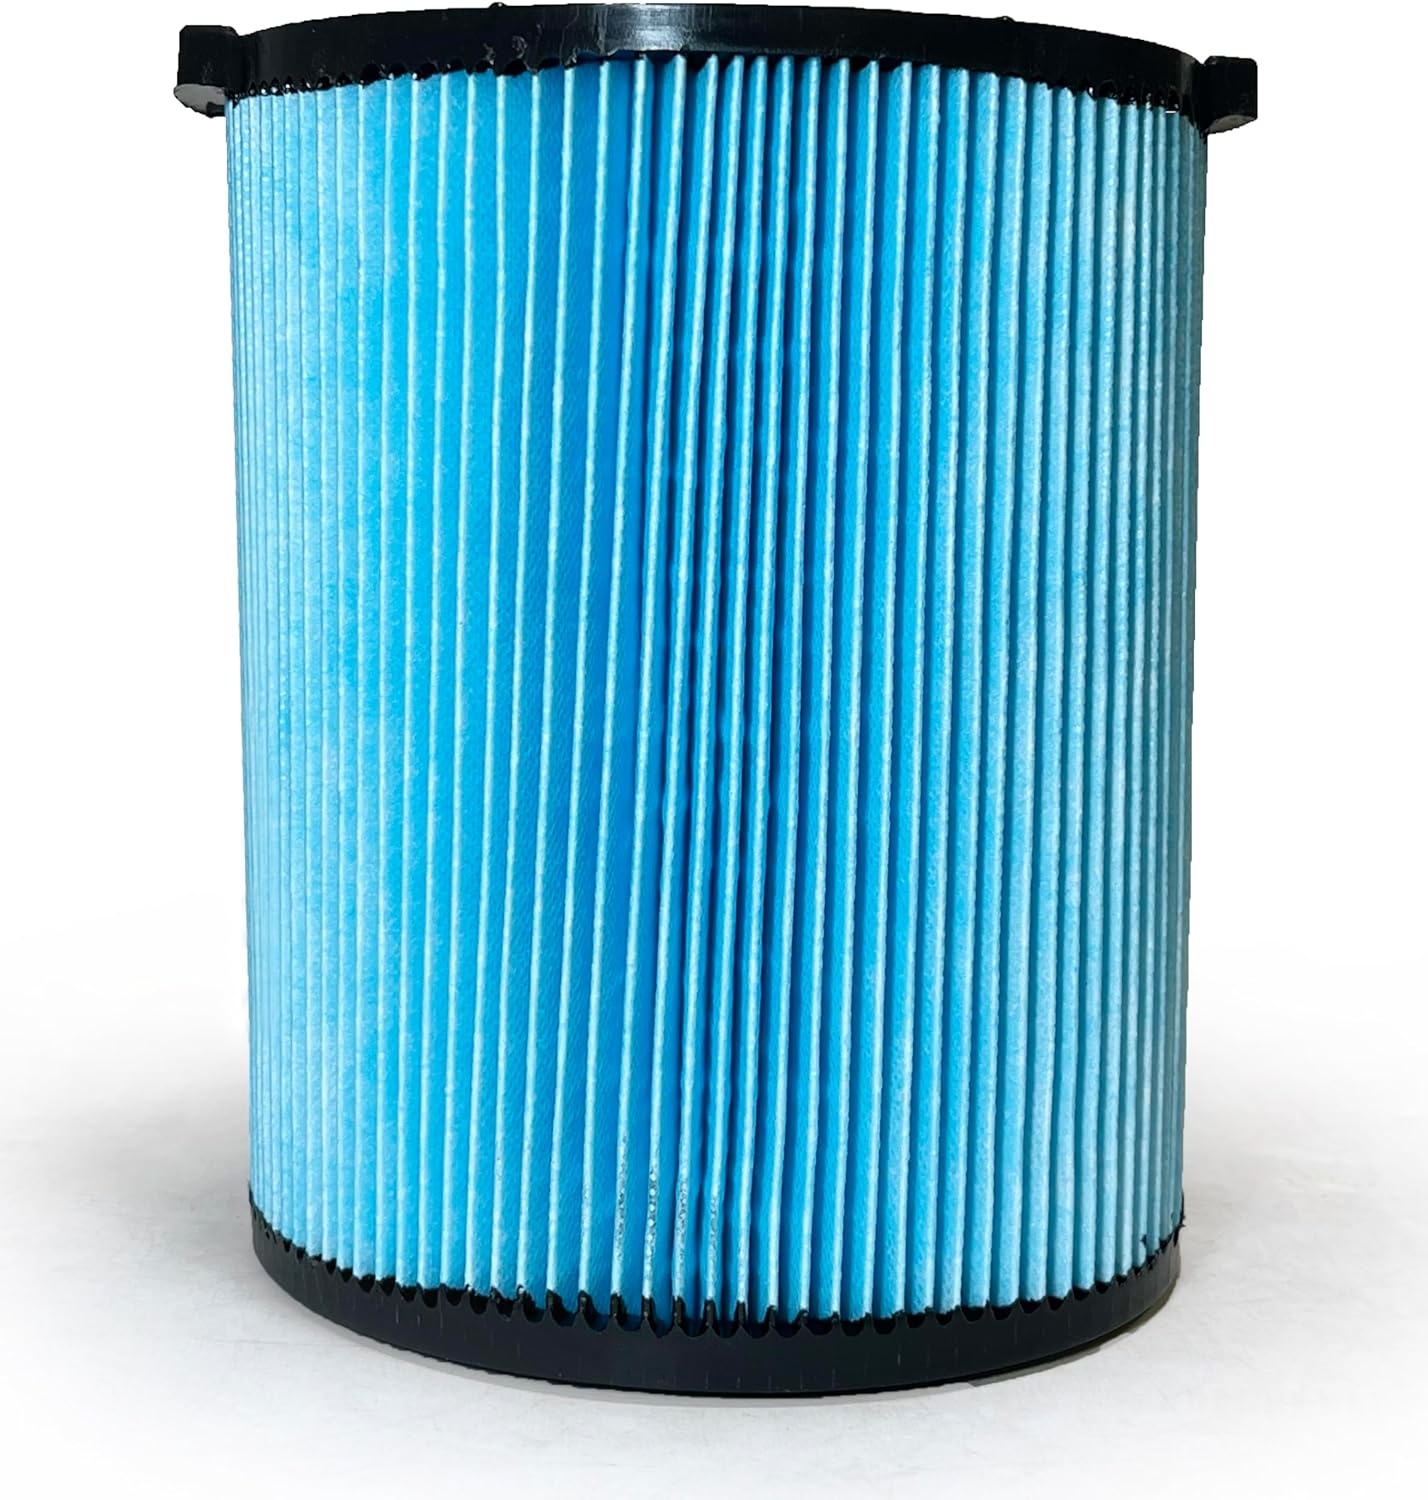 Nispira VF0005 3-Layer High-efficiency Replacement Filter Compatible with Ridgid Wet/Dry Vacs Vacuum 72952 5-20 Gallons WD1450 WD0970 WD1270 WD09700 WD06700 WD1680 WD1851 RV2400A